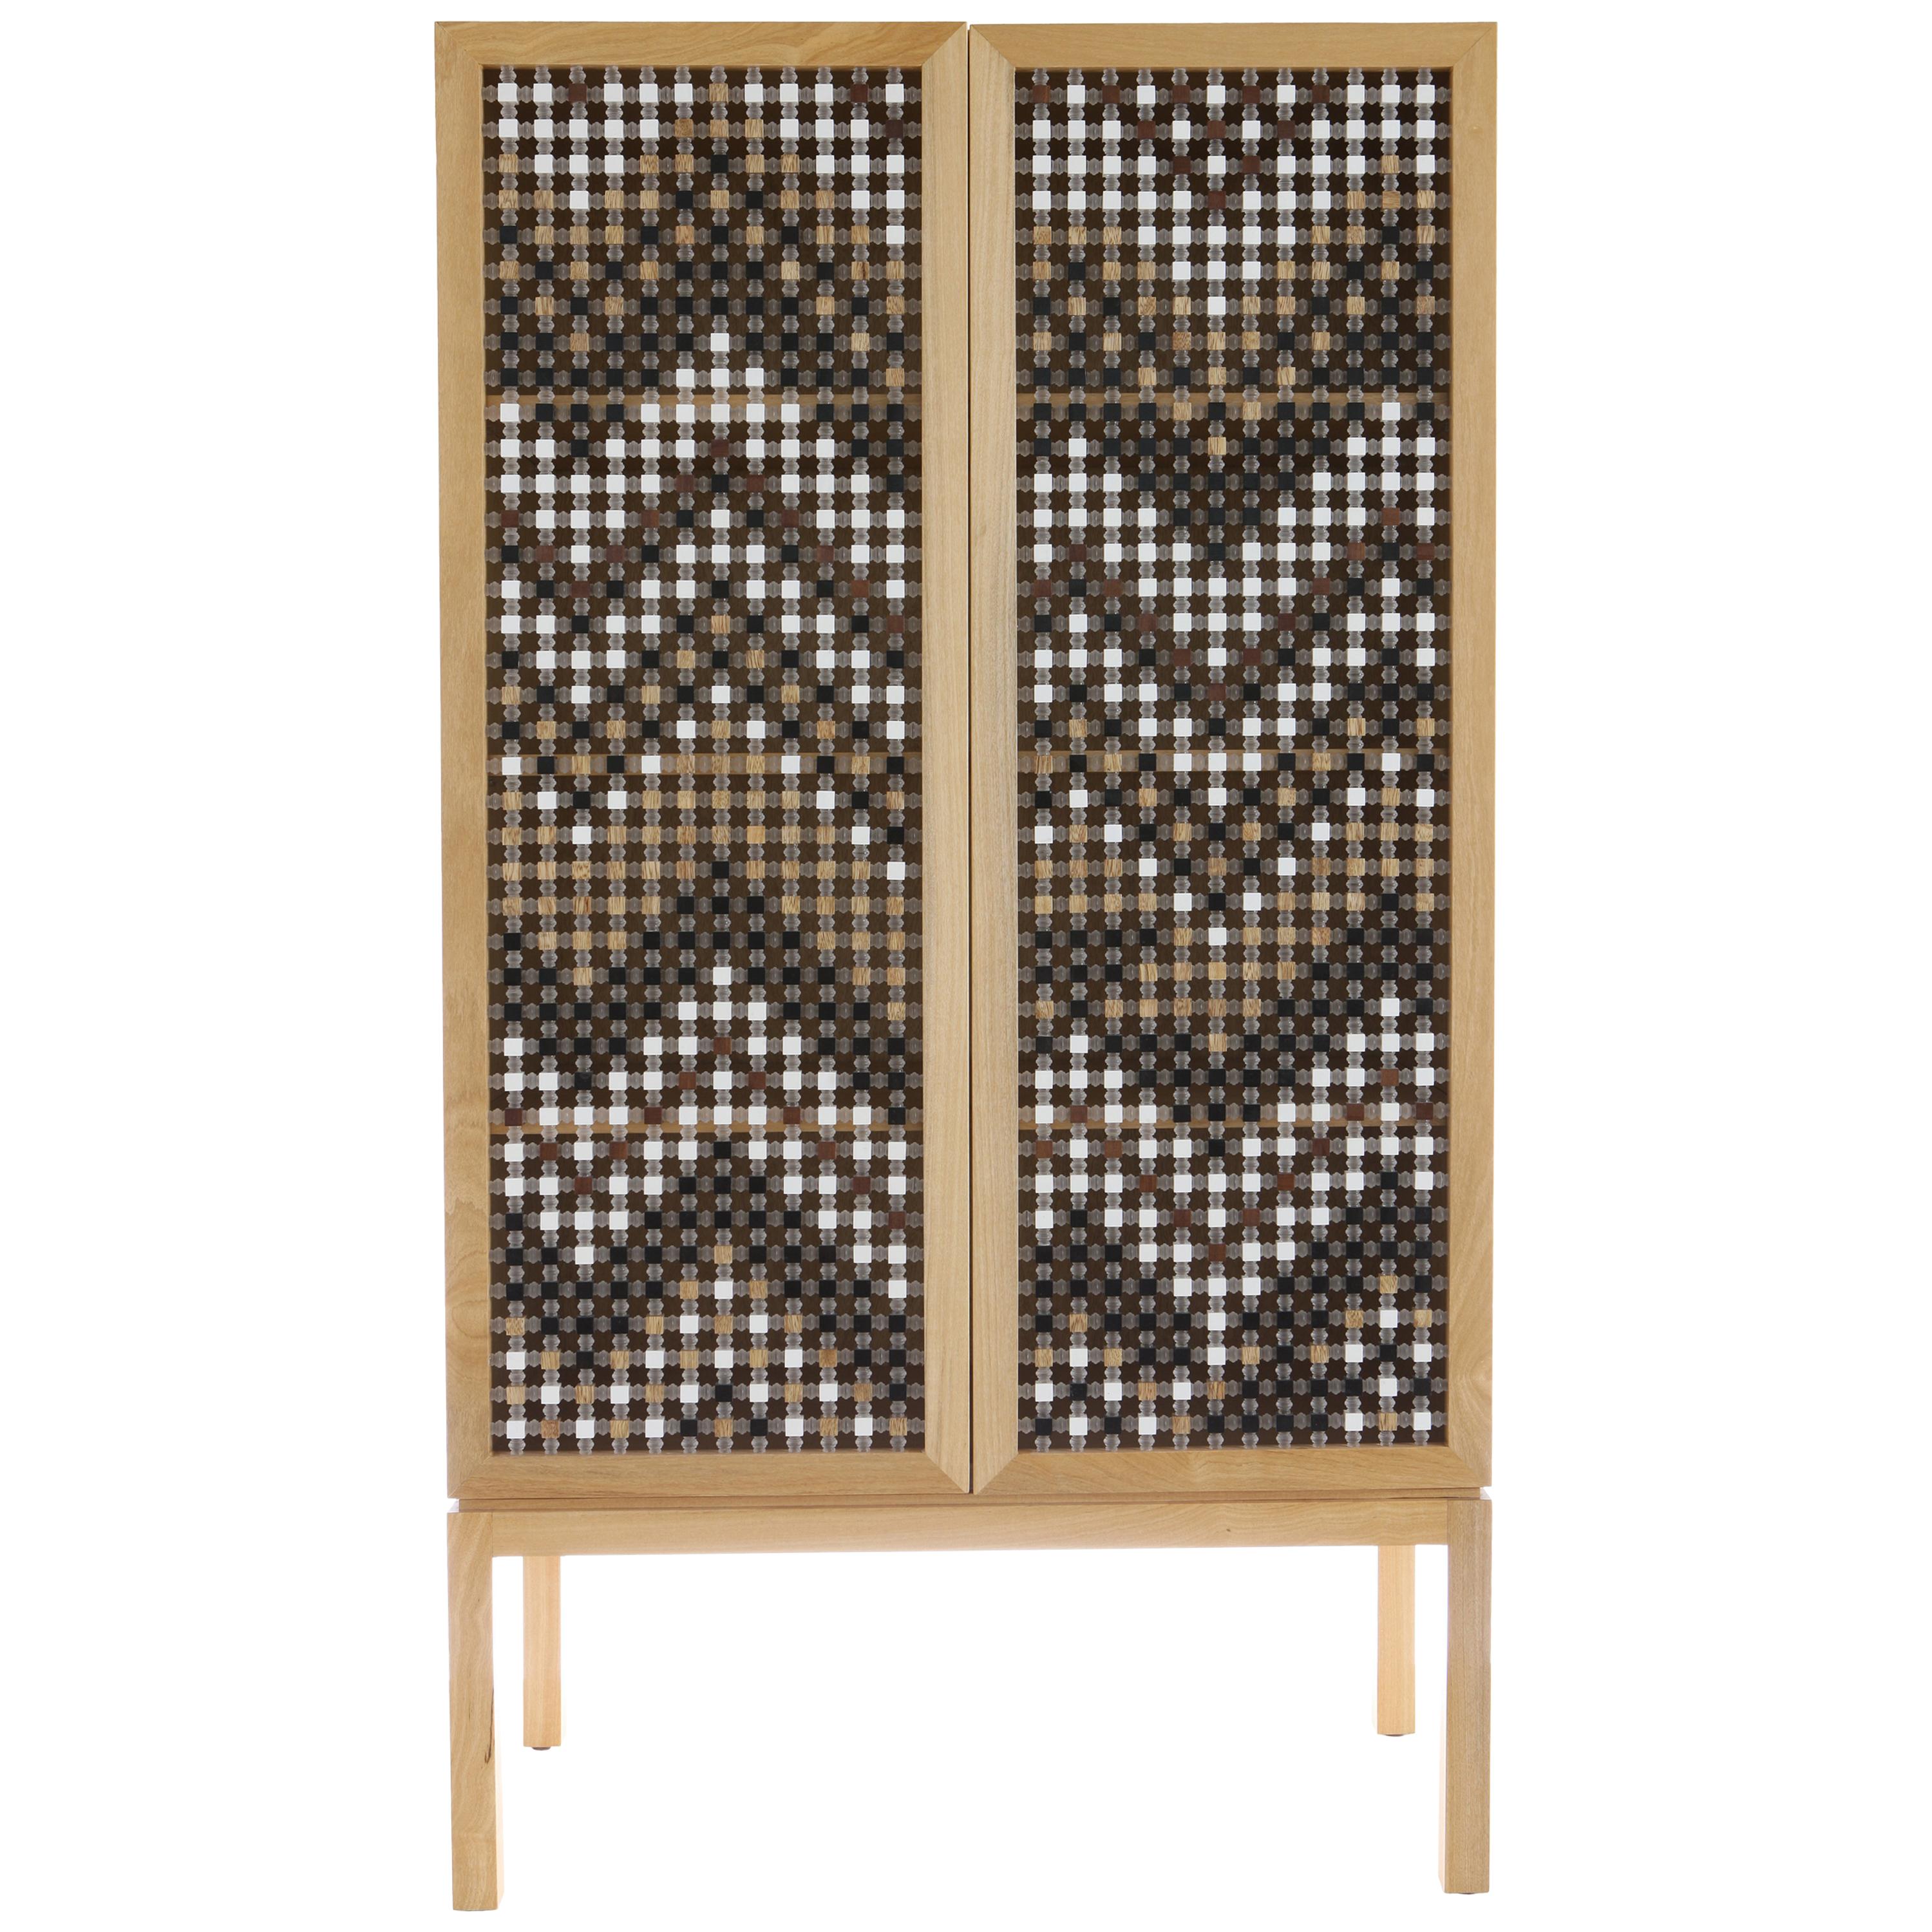 Ali Baba - Cabinet inspired by the Mousharabiyeh doors - Middle Eastern For Sale